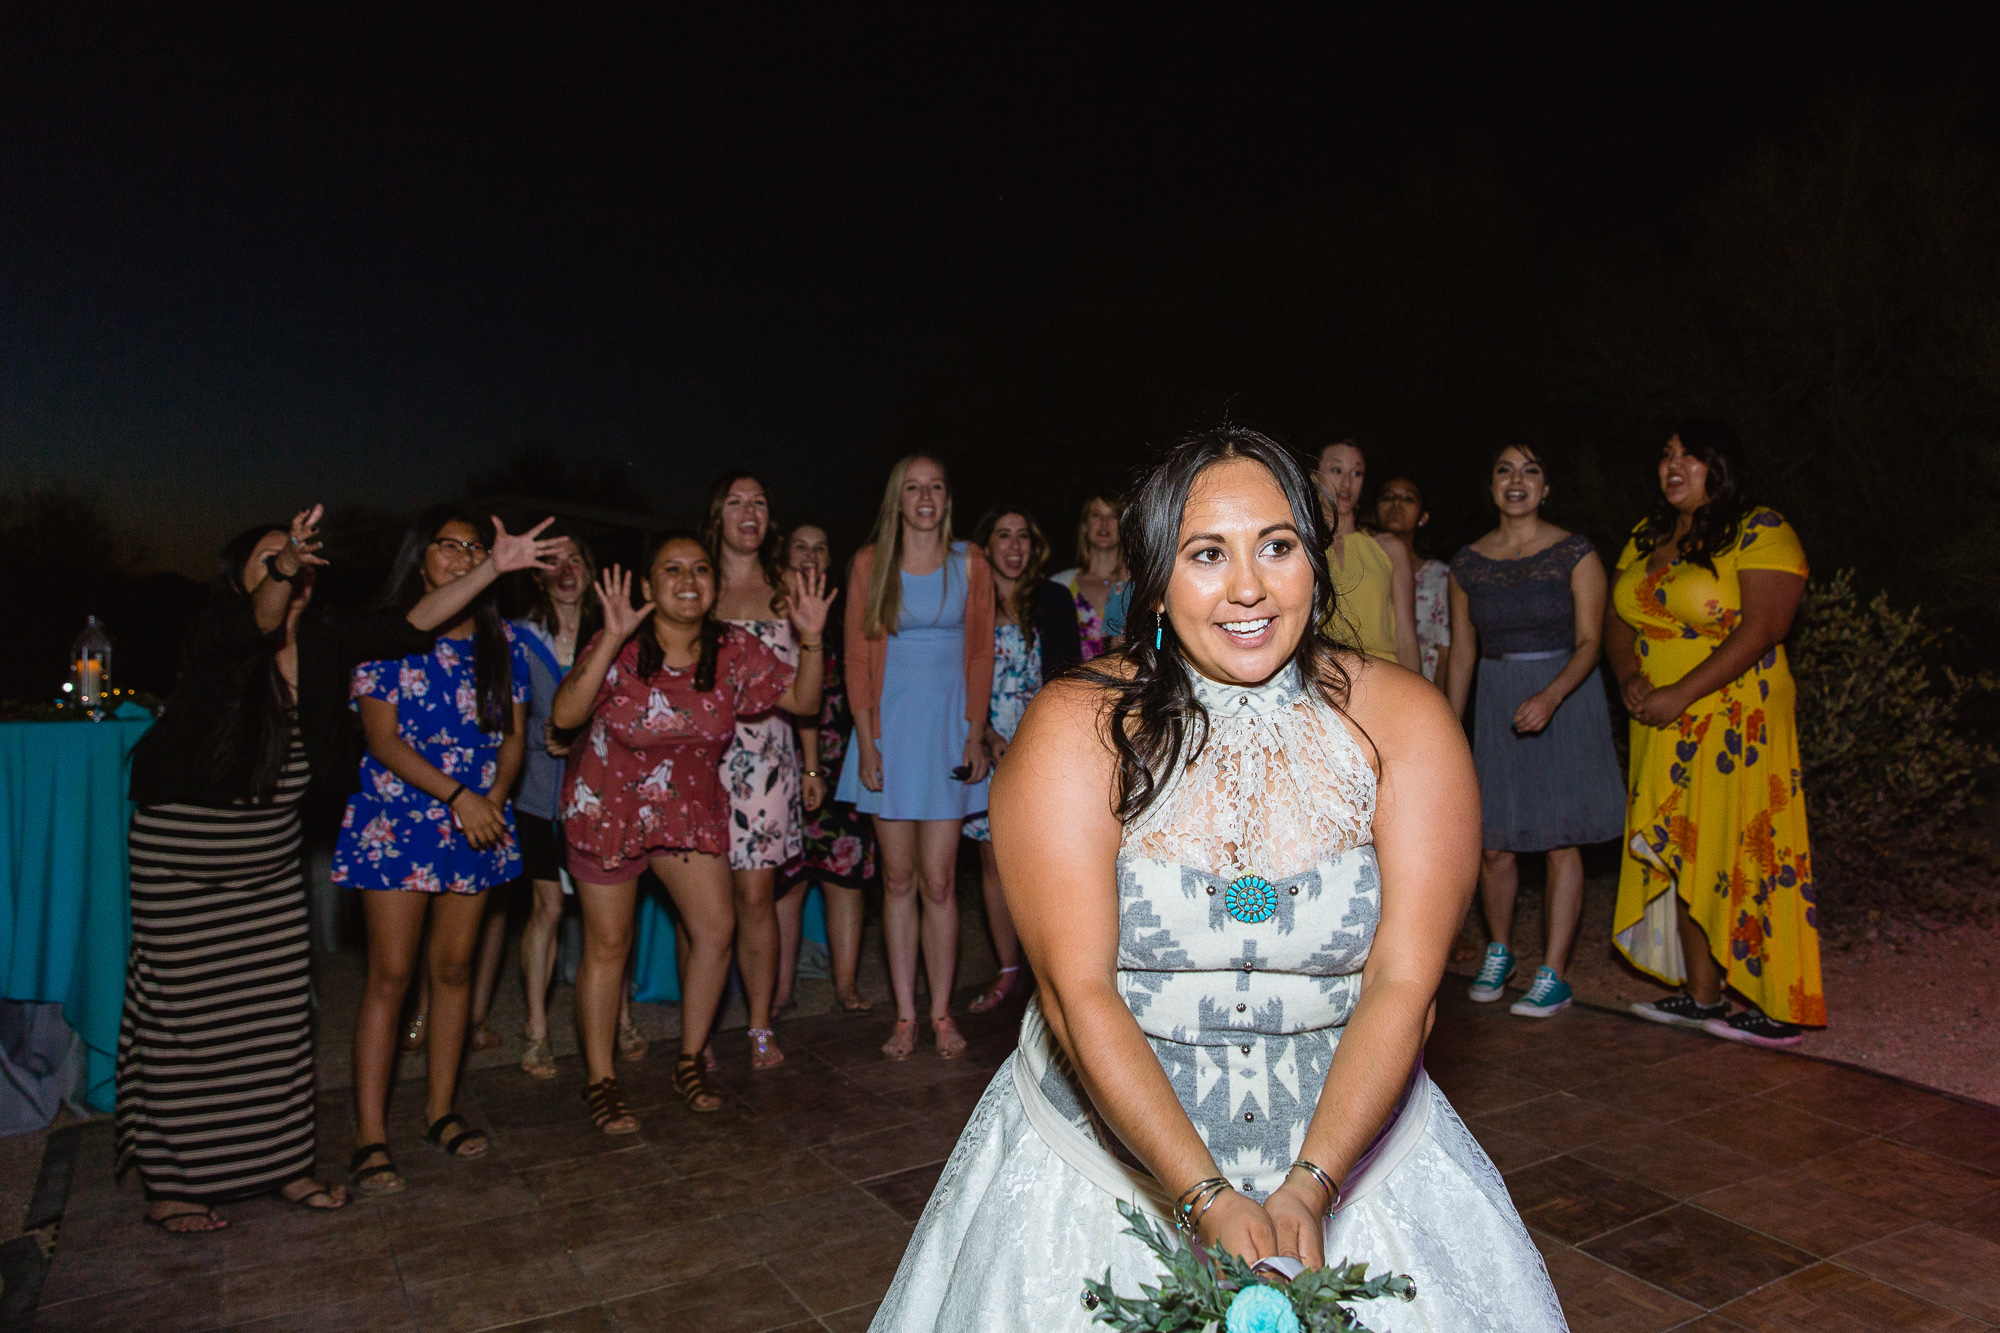 Bride tossing the bouquet to all the single ladies at her wedding reception by PMA Photography.